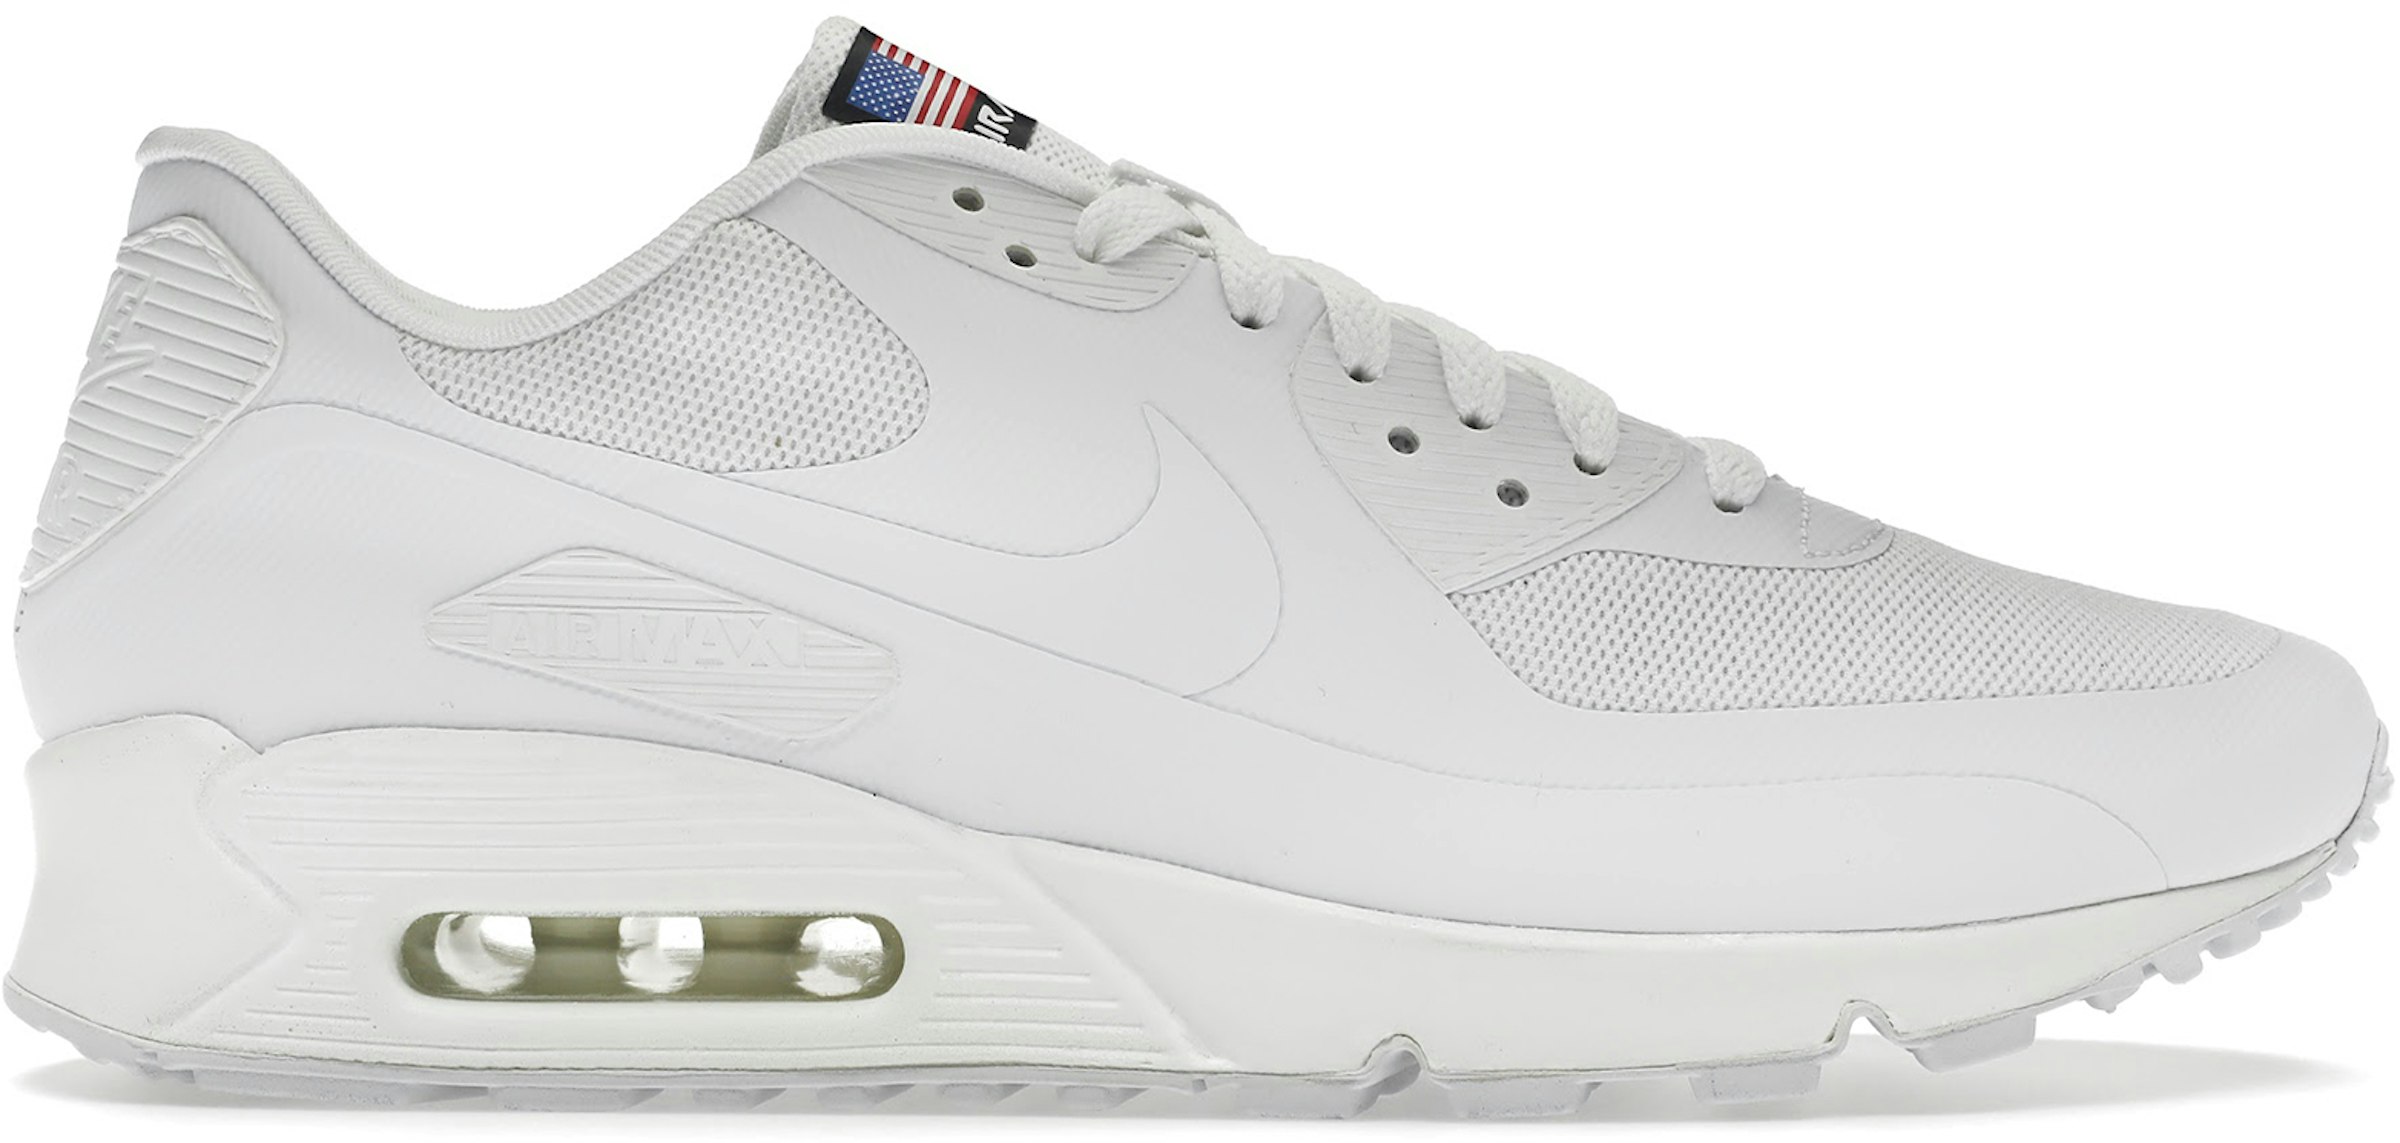 Air Max 90 Hyperfuse Day White Men's - 613841-110 - US